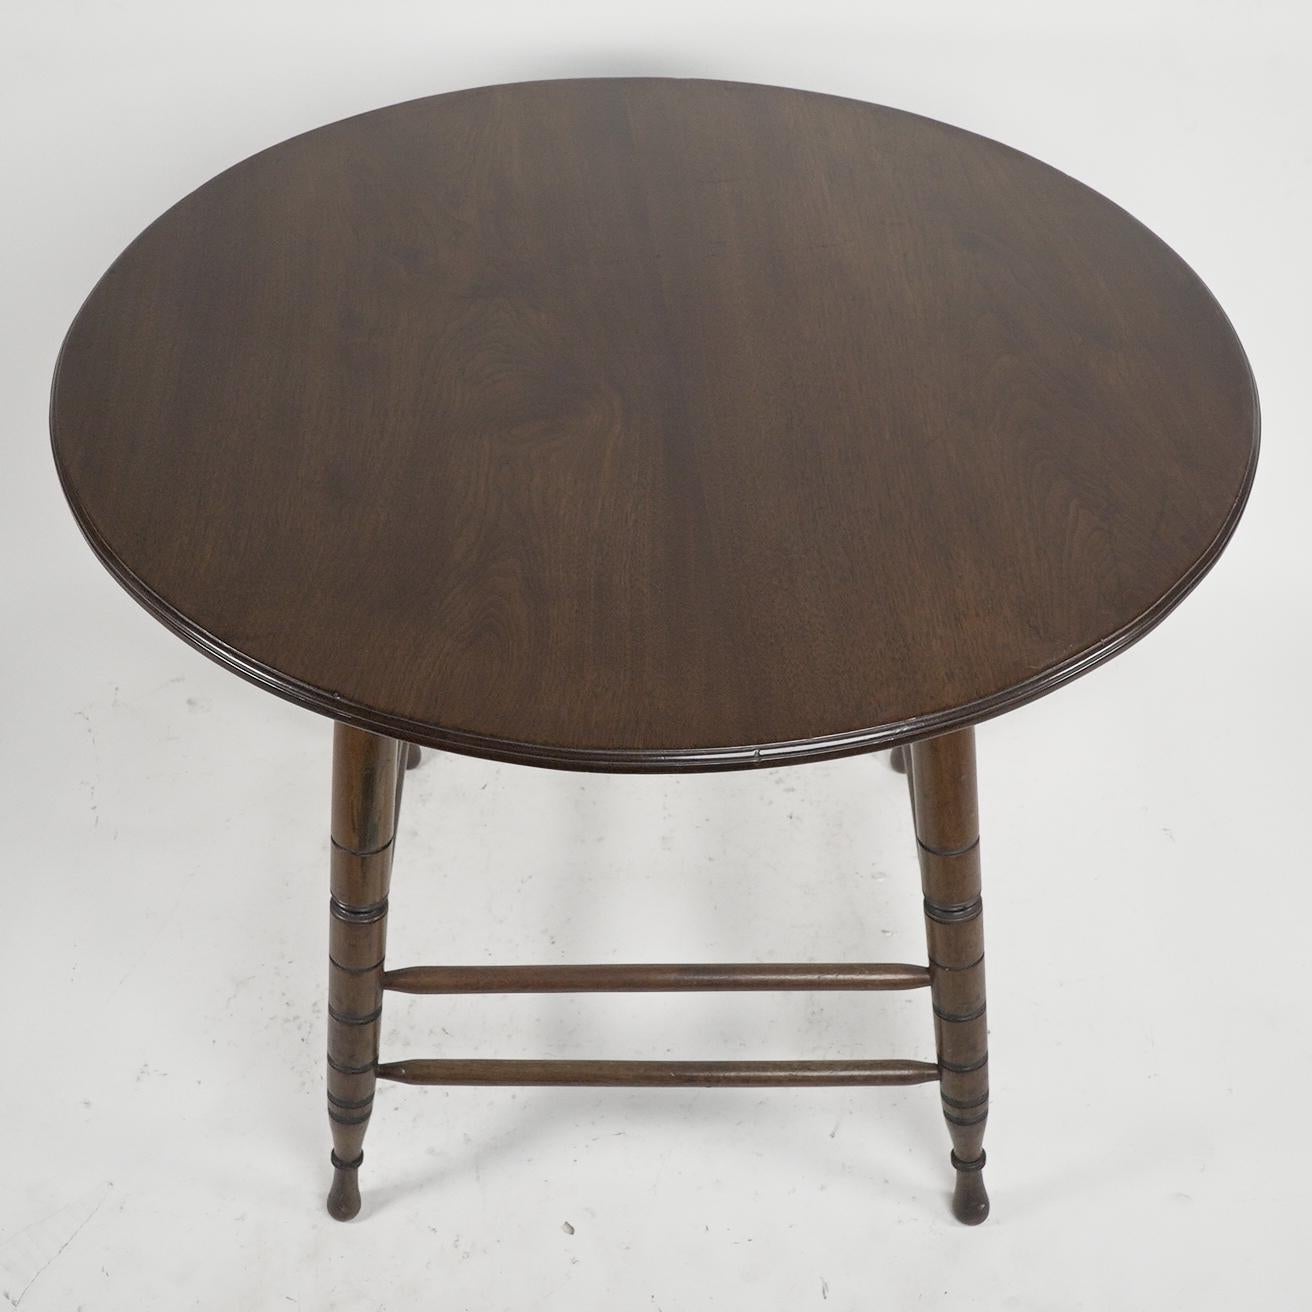 English Aesthetic Movement Walnut centre table with incised circular details to the legs For Sale